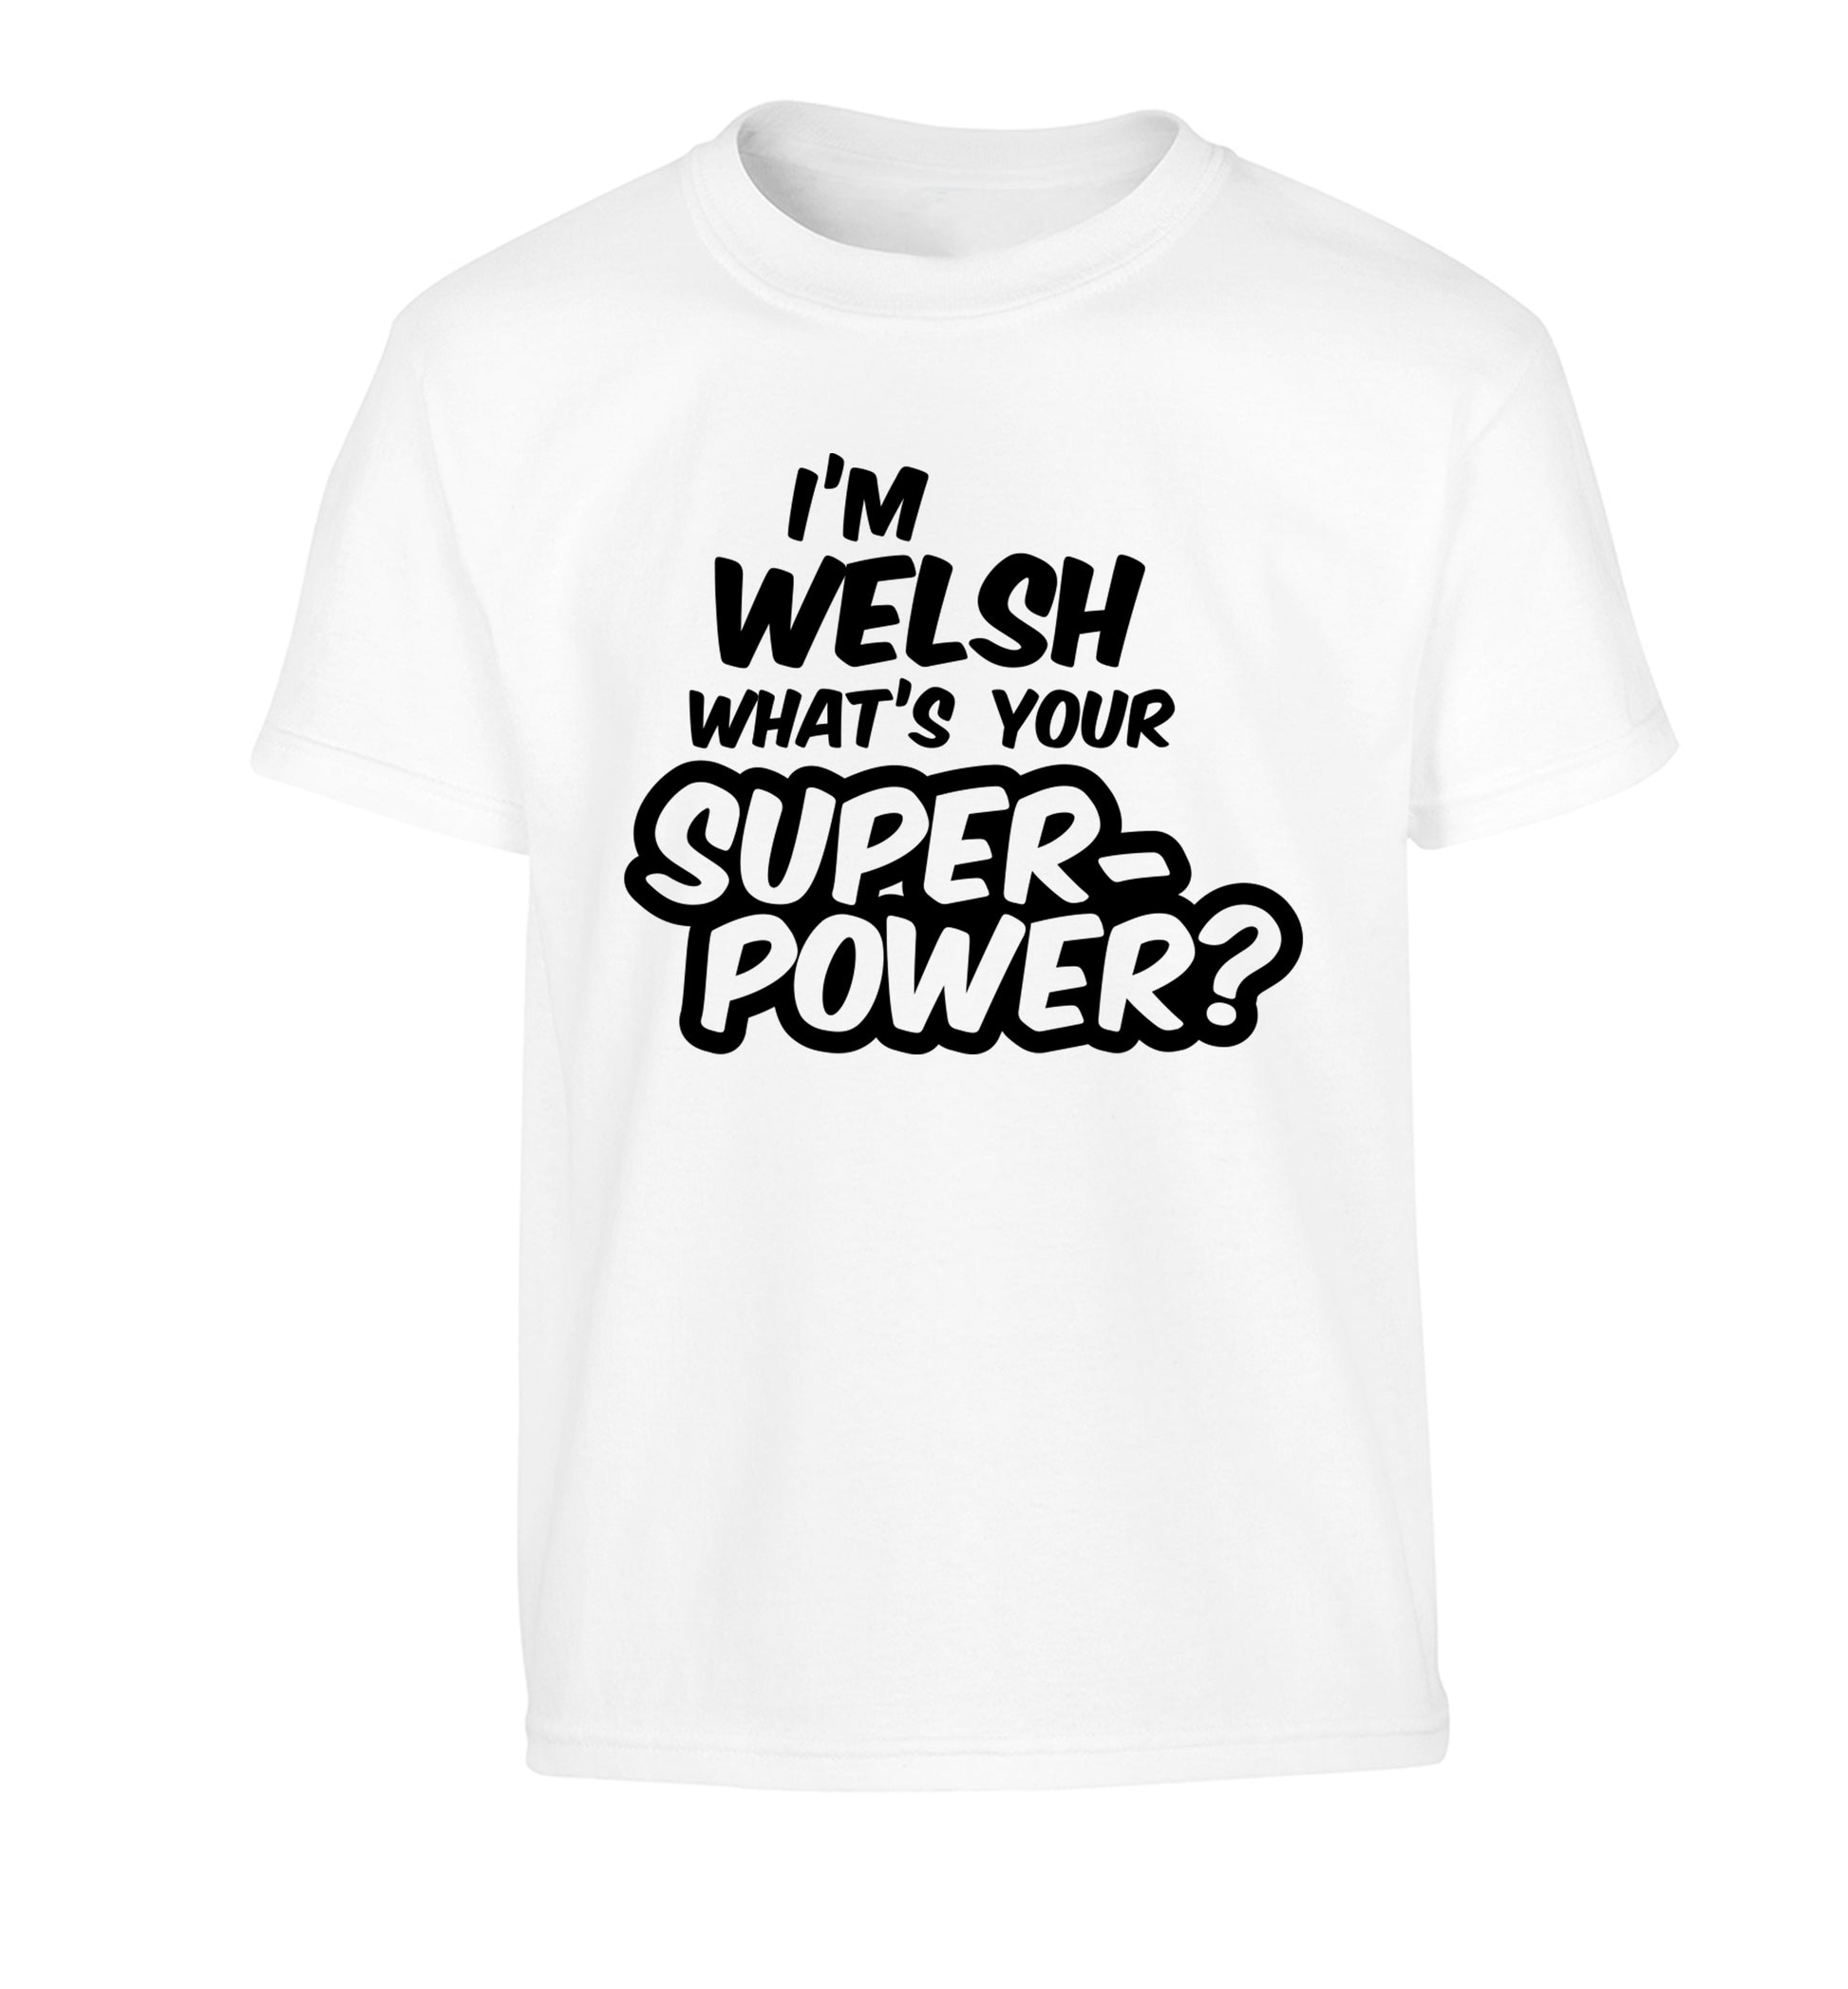 I'm Welsh what's your superpower? Children's white Tshirt 12-13 Years